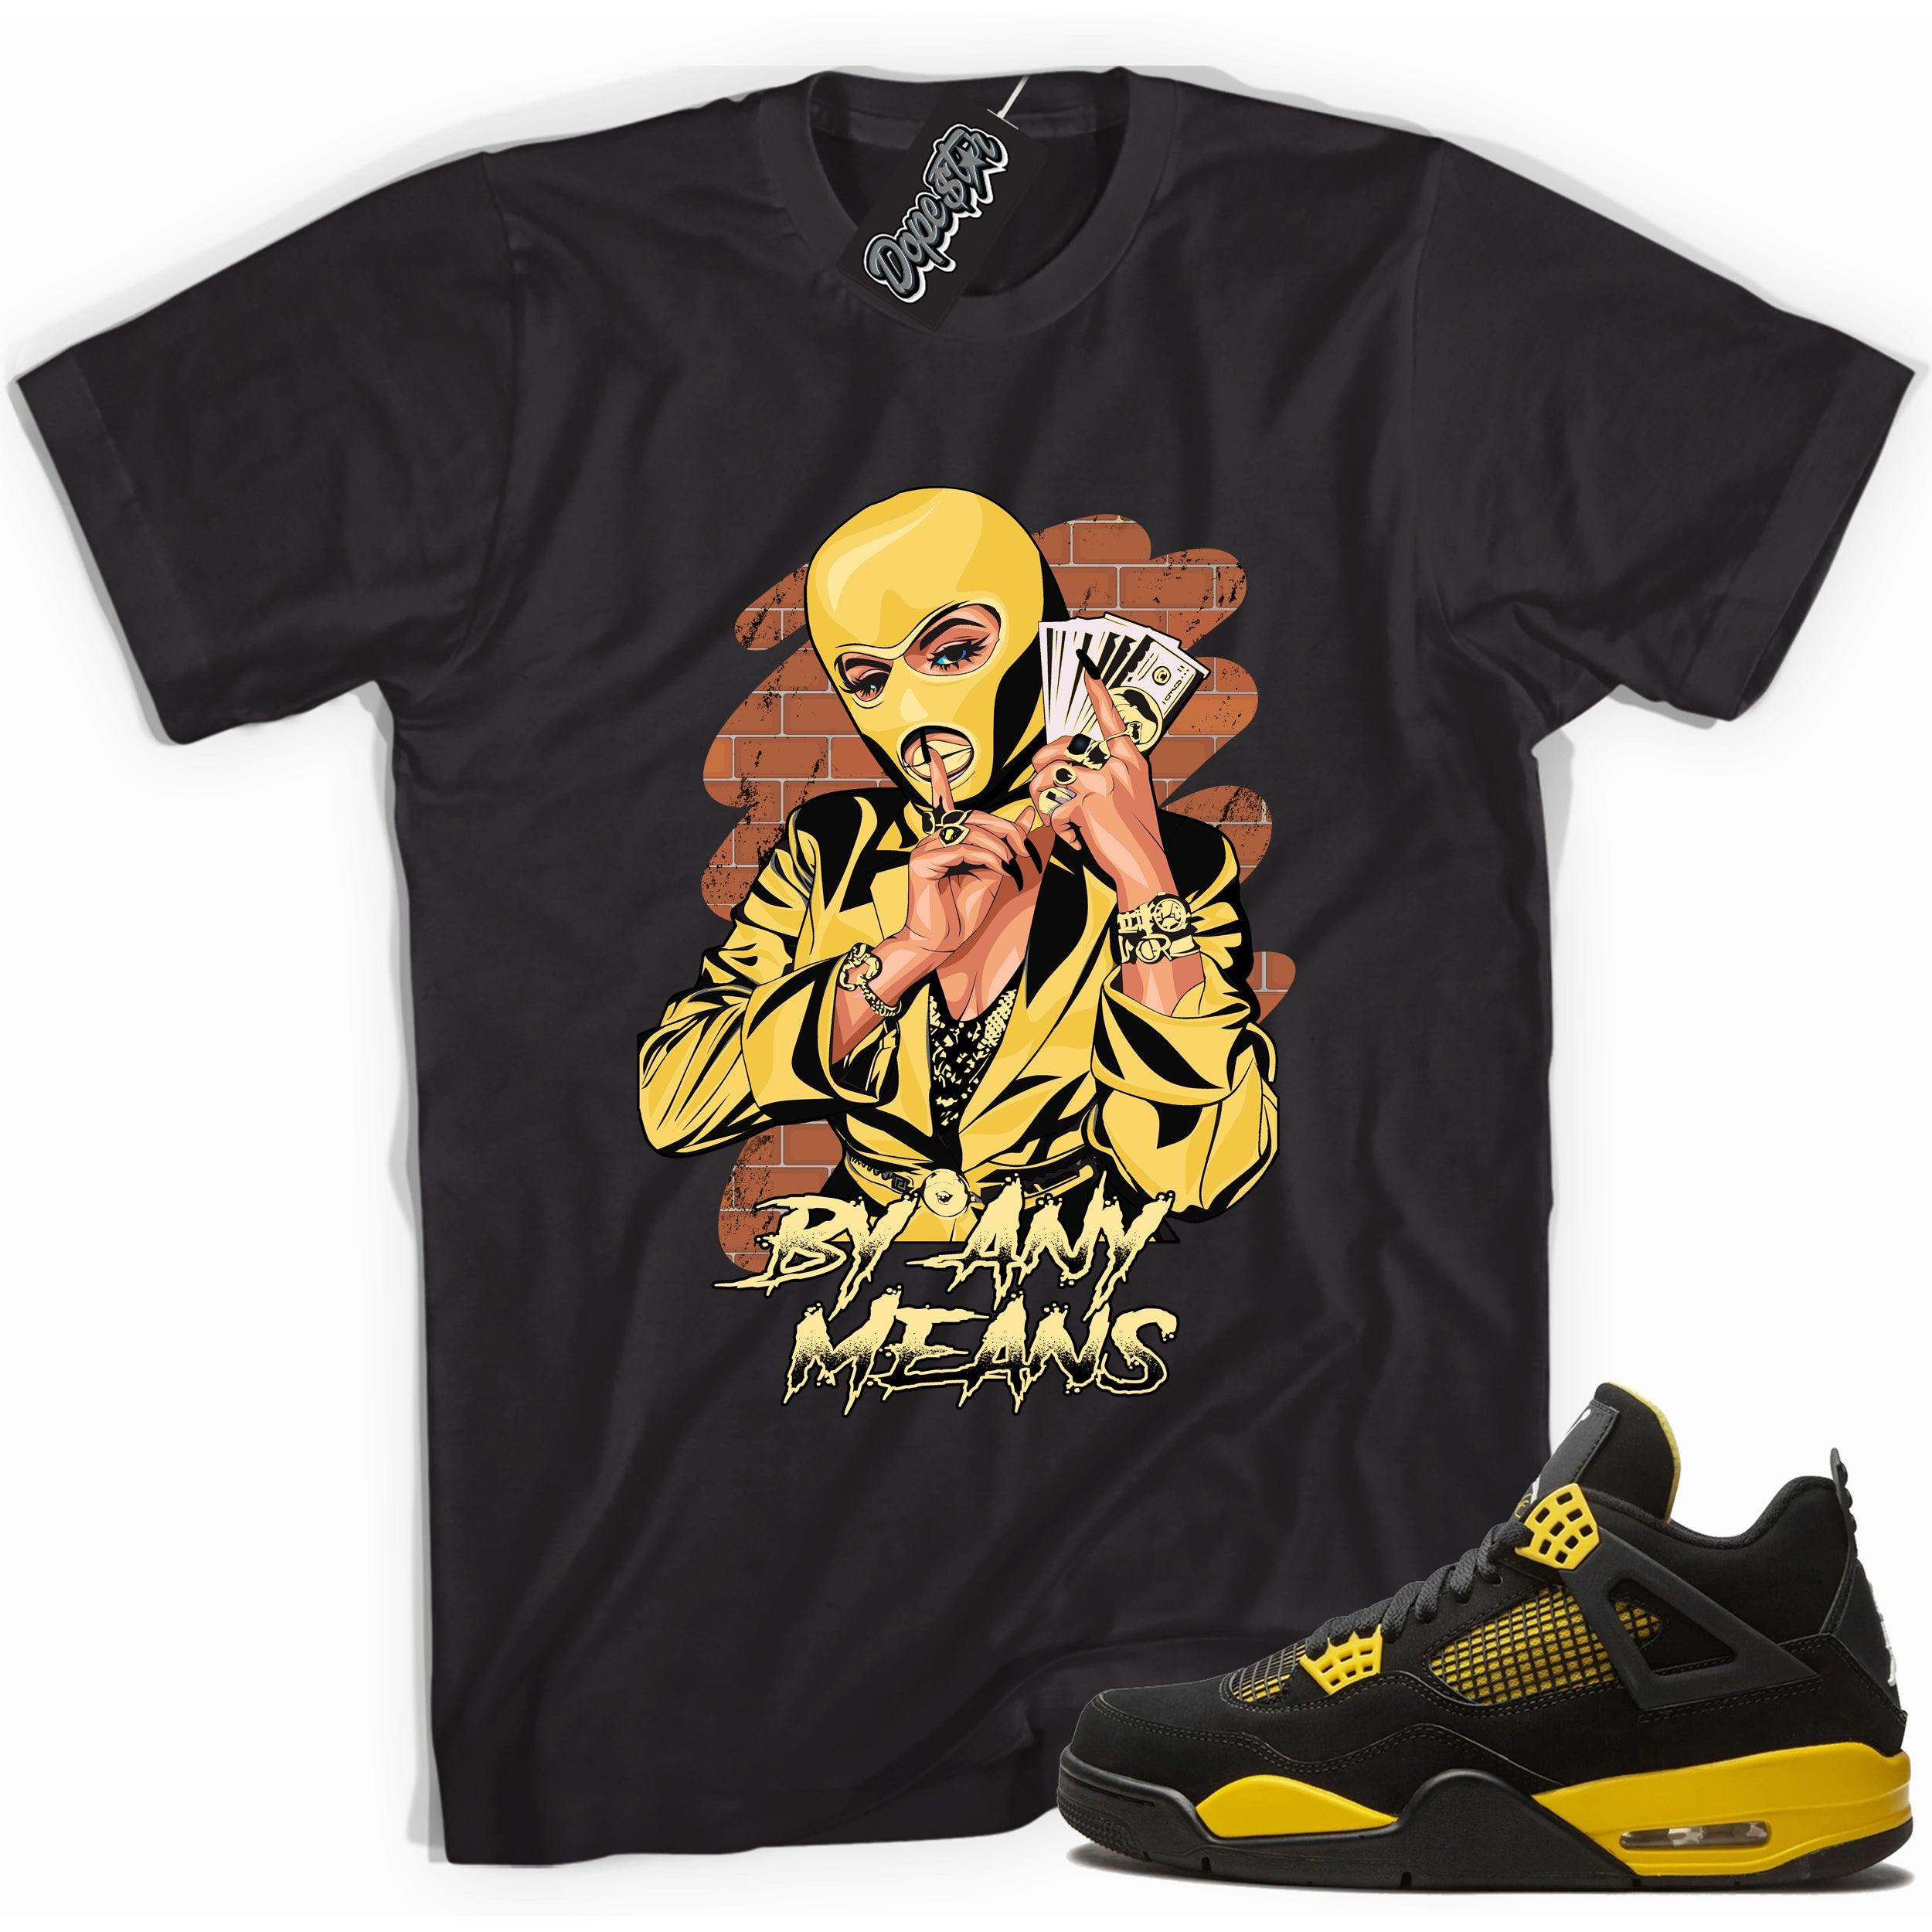 Cool black graphic tee with 'by any means' print, that perfectly matches  Air Jordan 4 Thunder sneakers